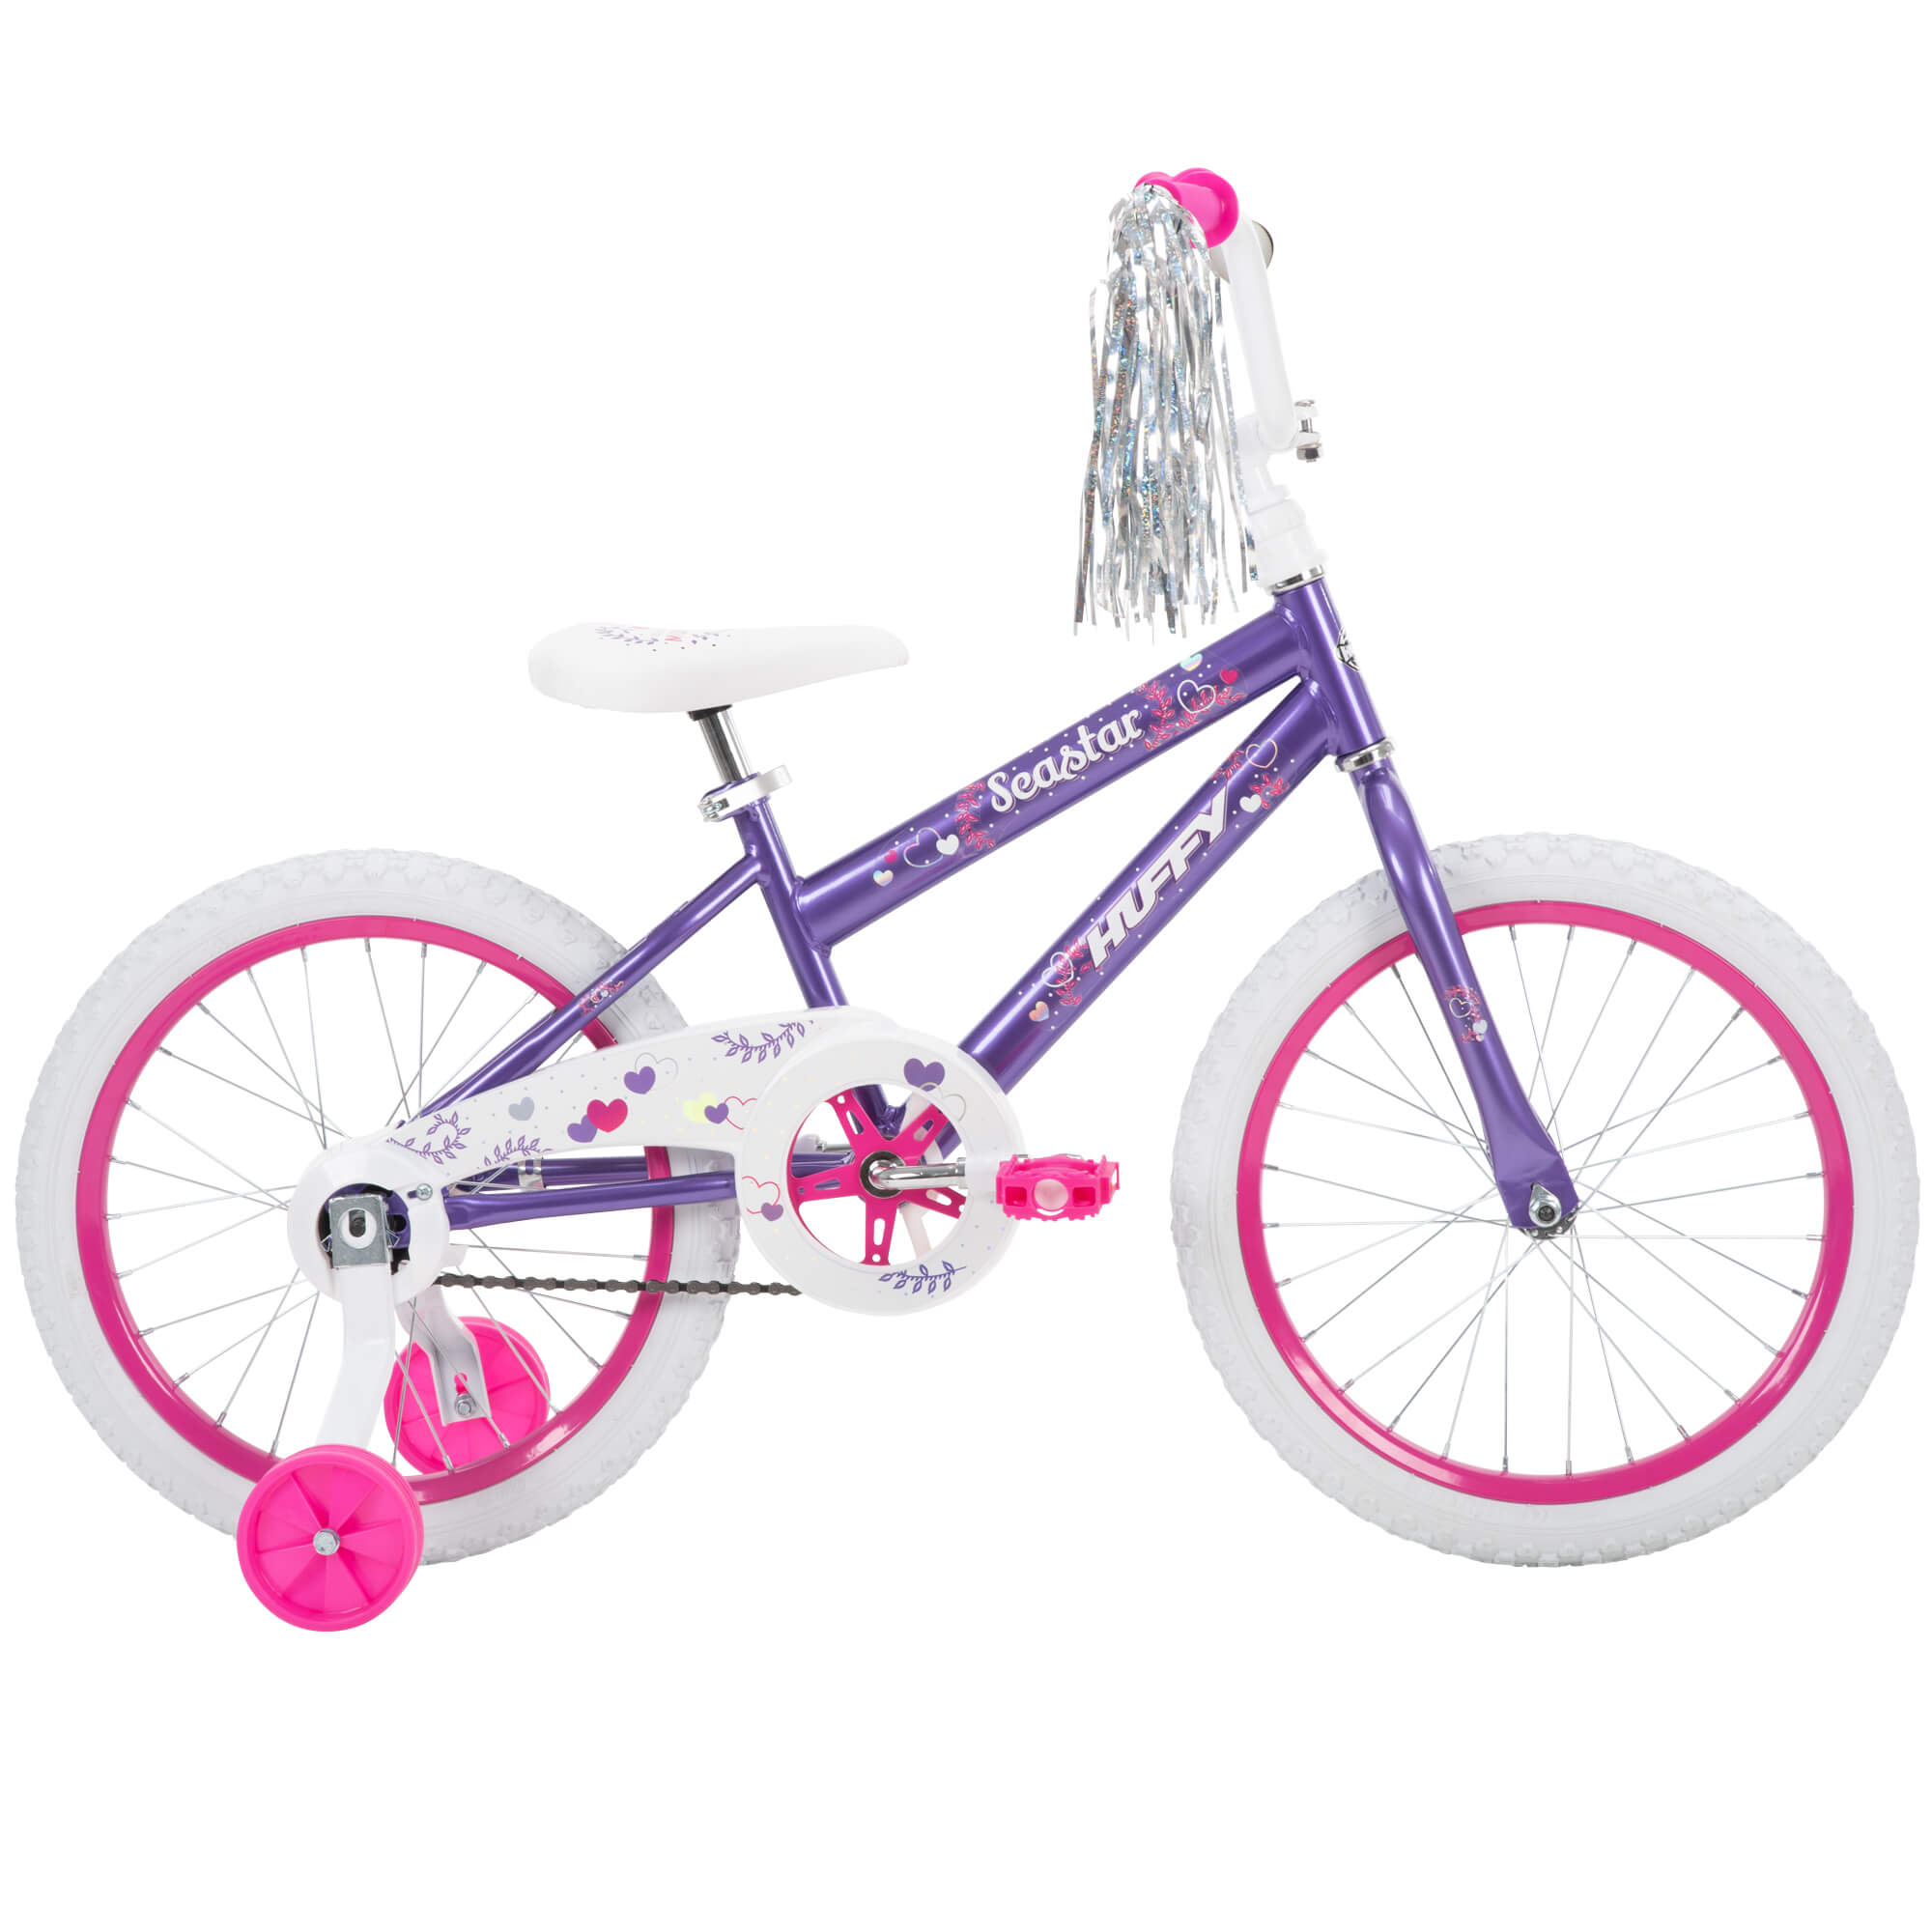 Huffy 18 in. Sea Star Kids Bike for Girls Ages 4 and up,Child, Metallic Purple - image 1 of 15